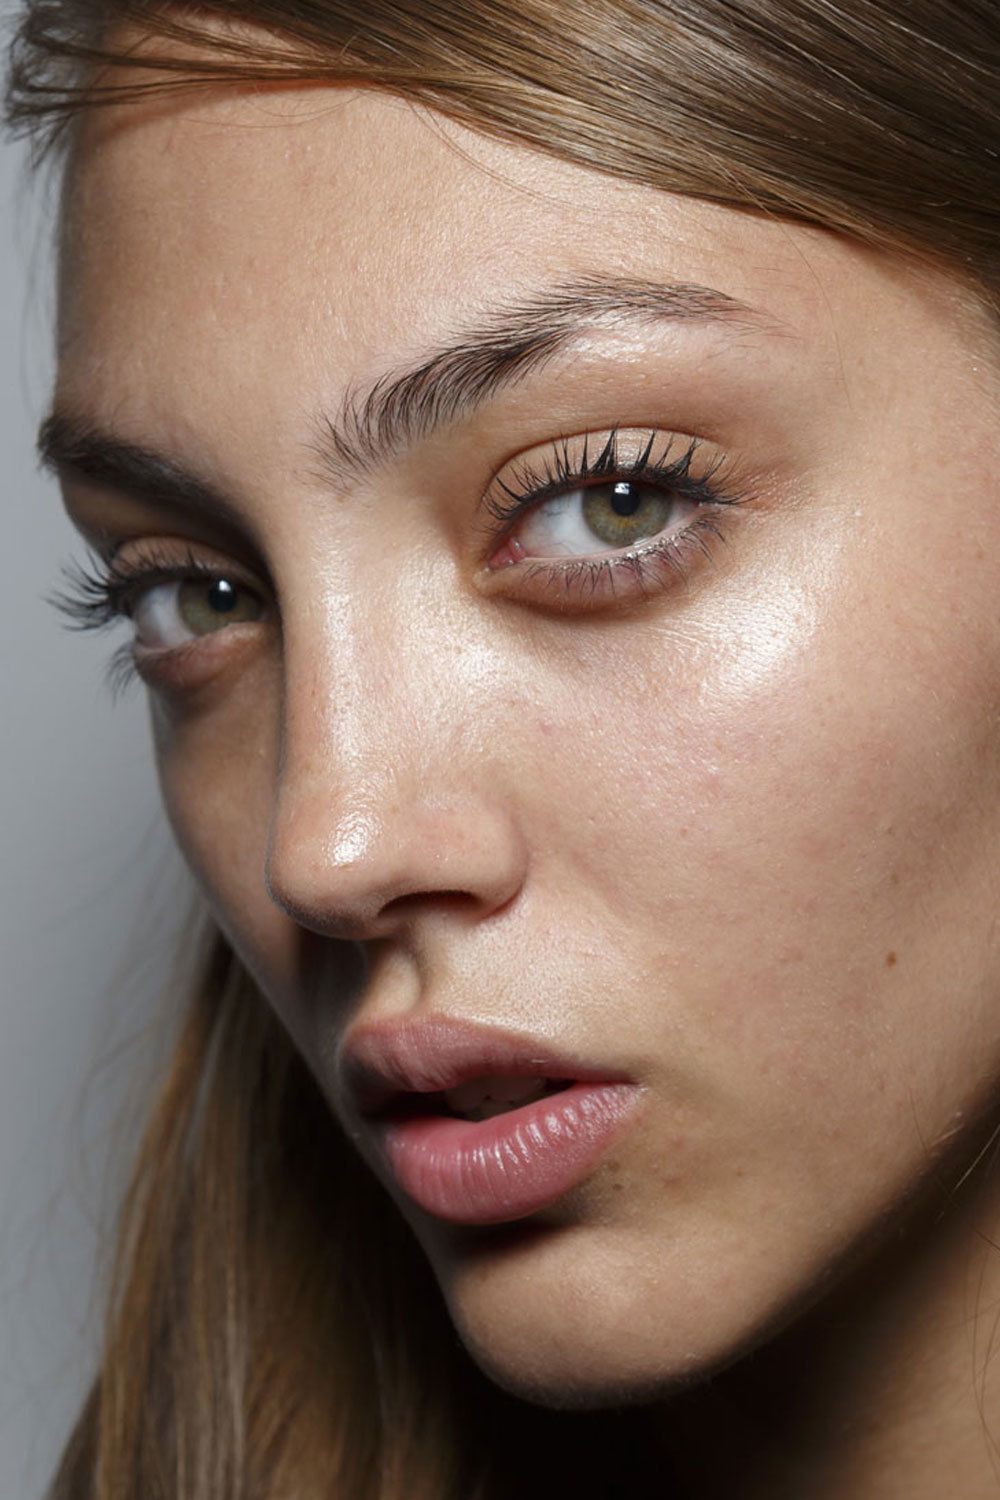 The modern approach to fake lashes